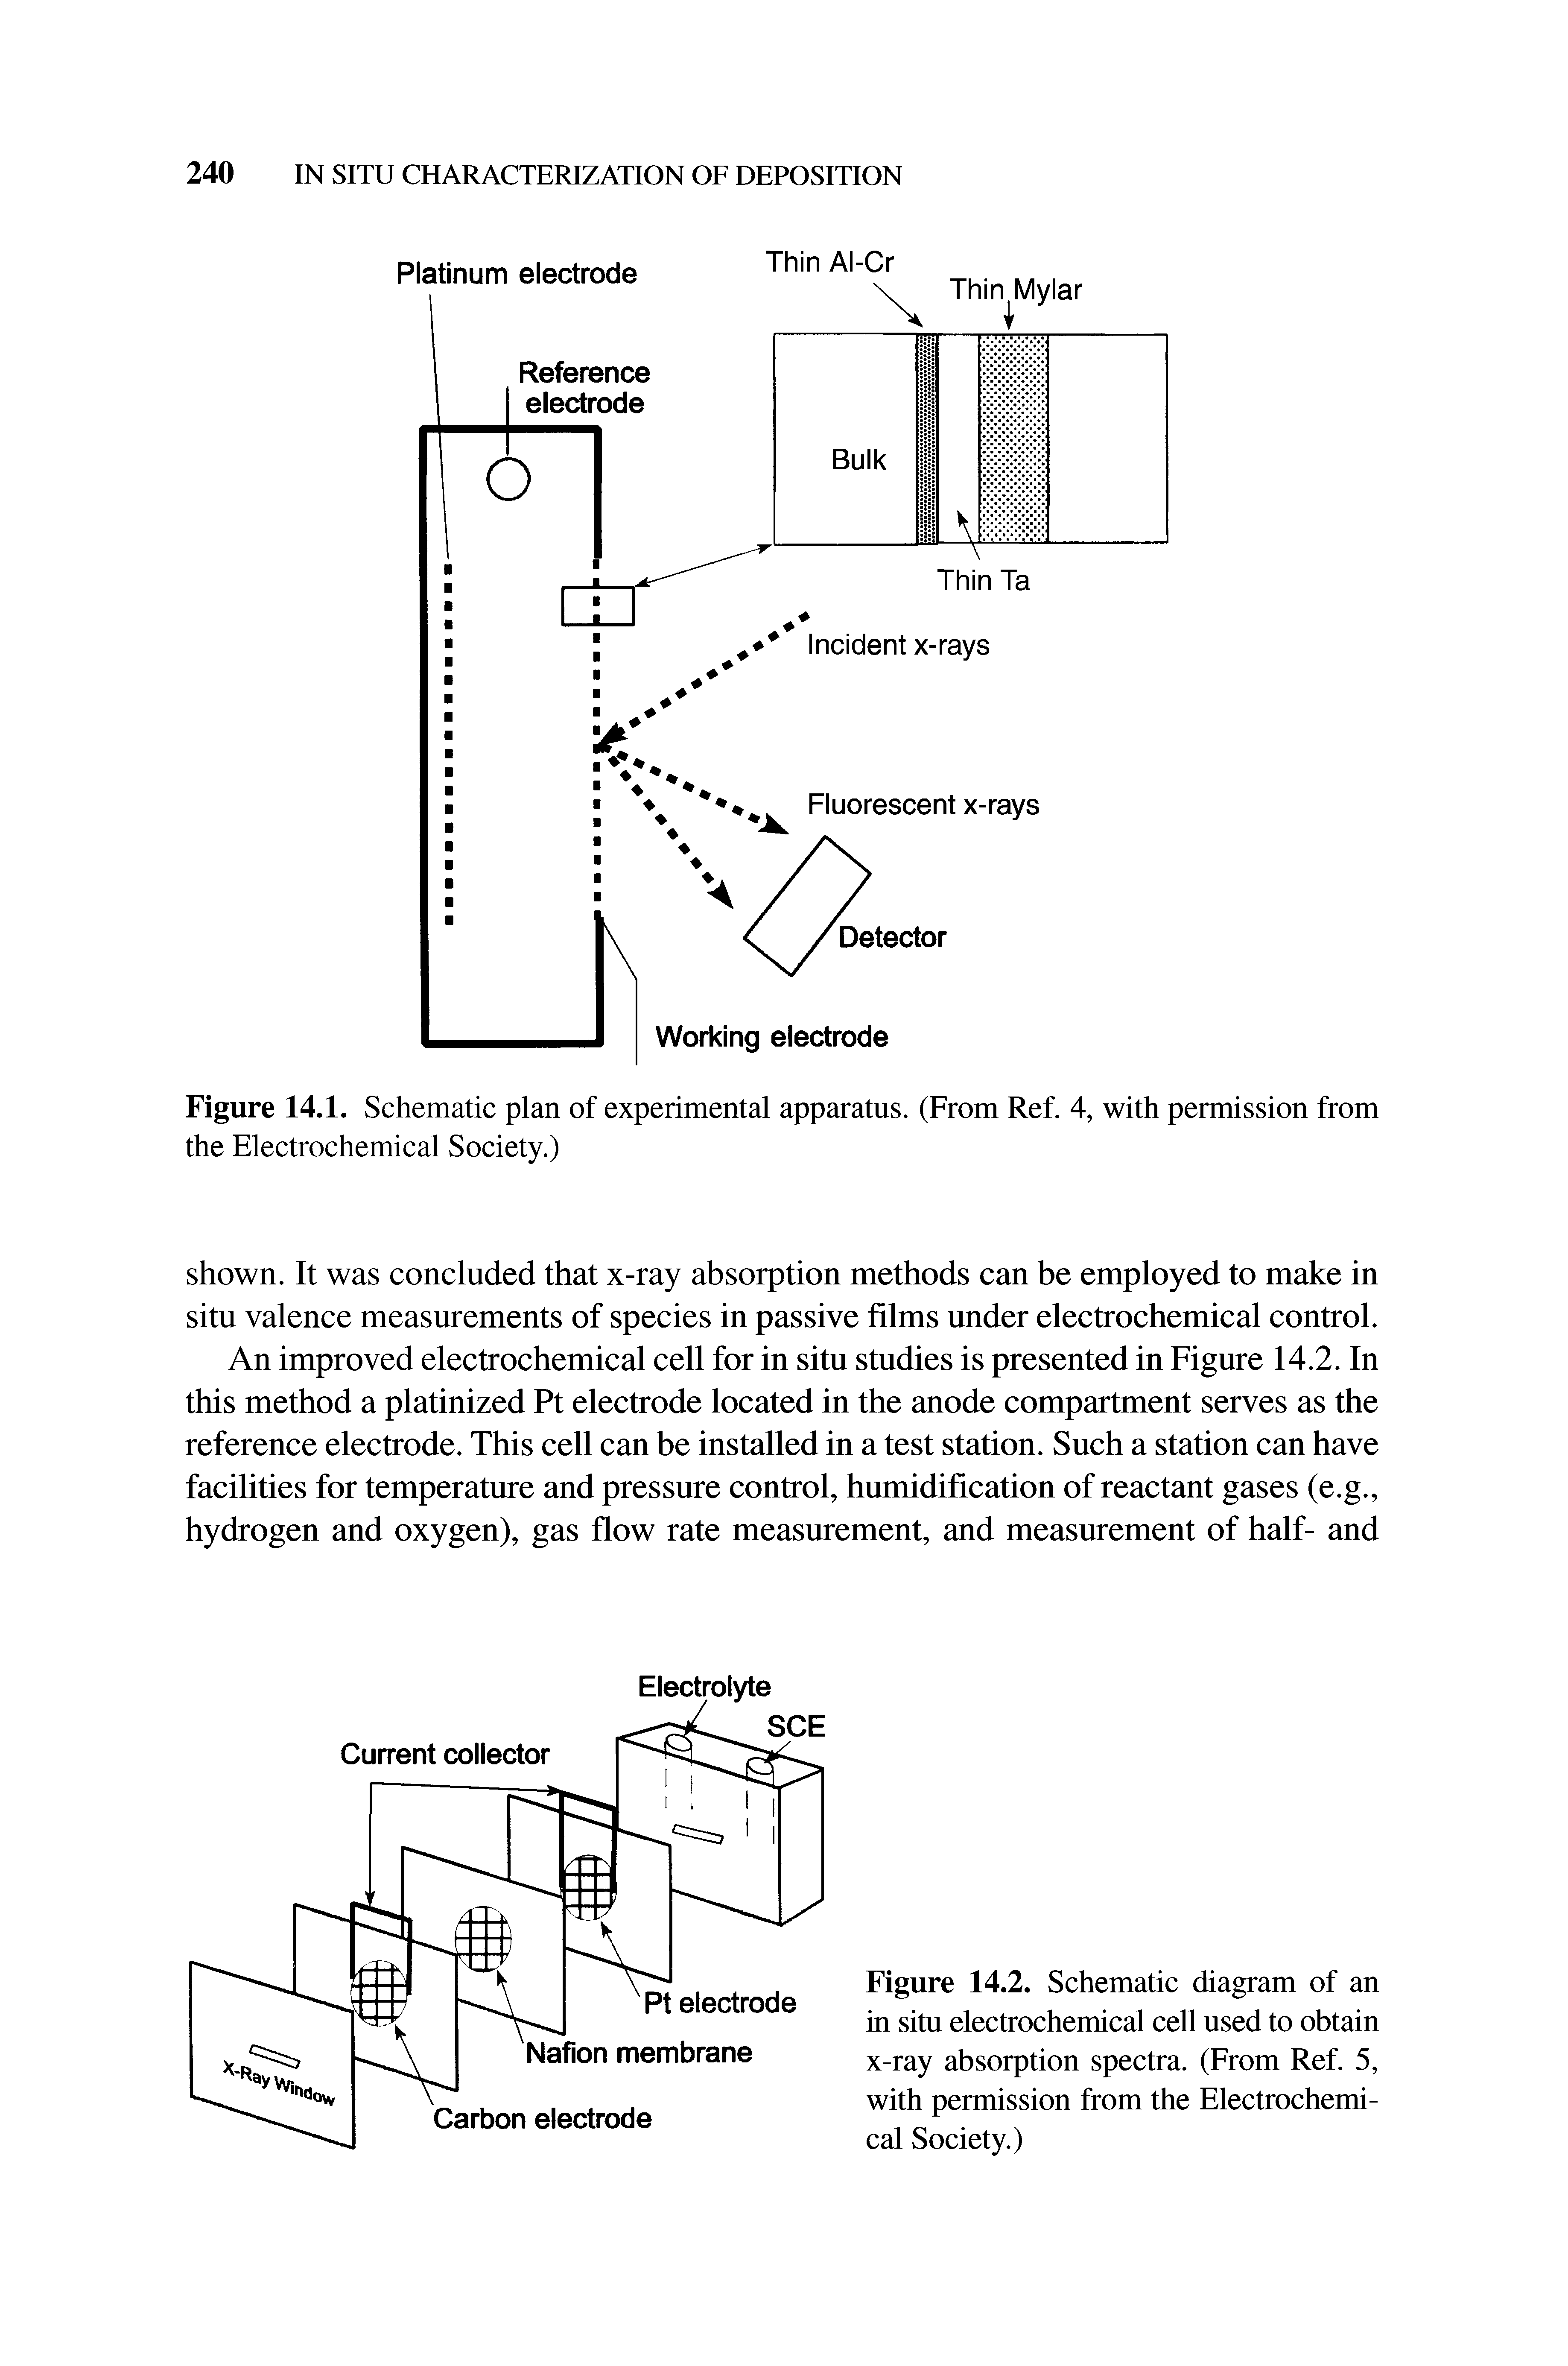 Figure 14.1. Schematic plan of experimental apparatus. (From Ref. 4, with permission from the Electrochemical Society.)...